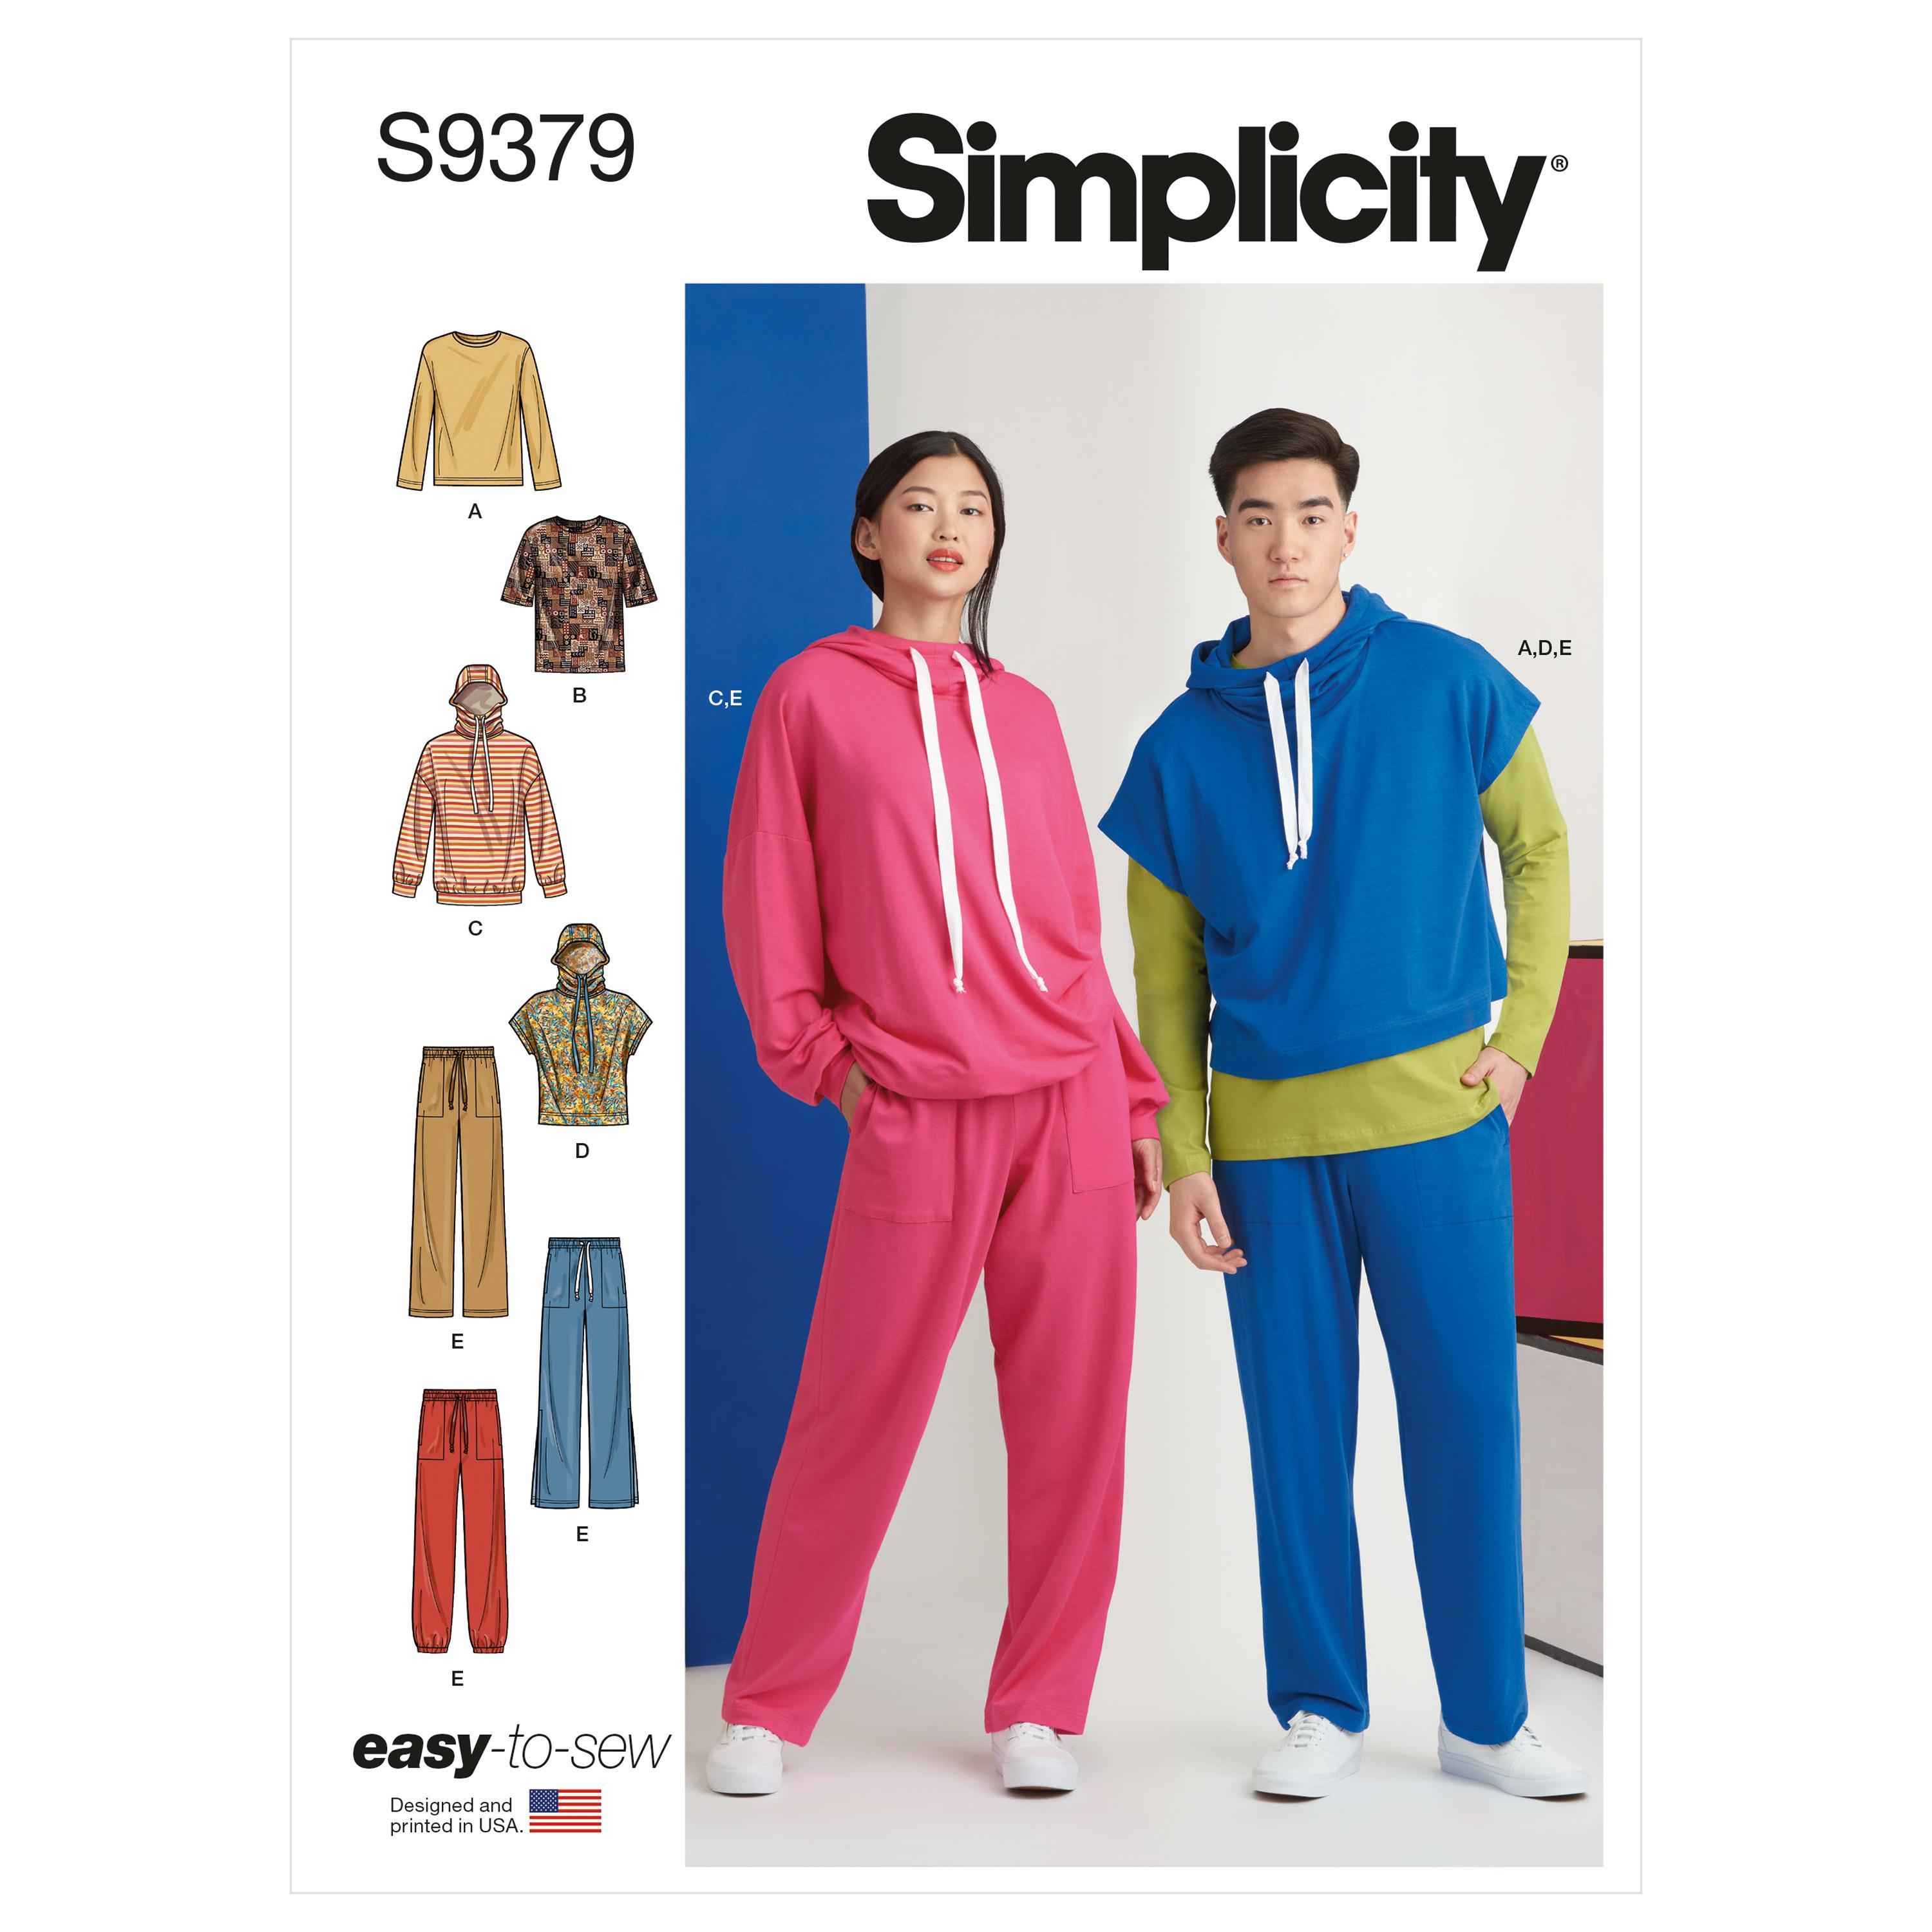 Simplicity Sewing Pattern S9379 Unisex Oversized Knit Hoodies, Pants and Tees